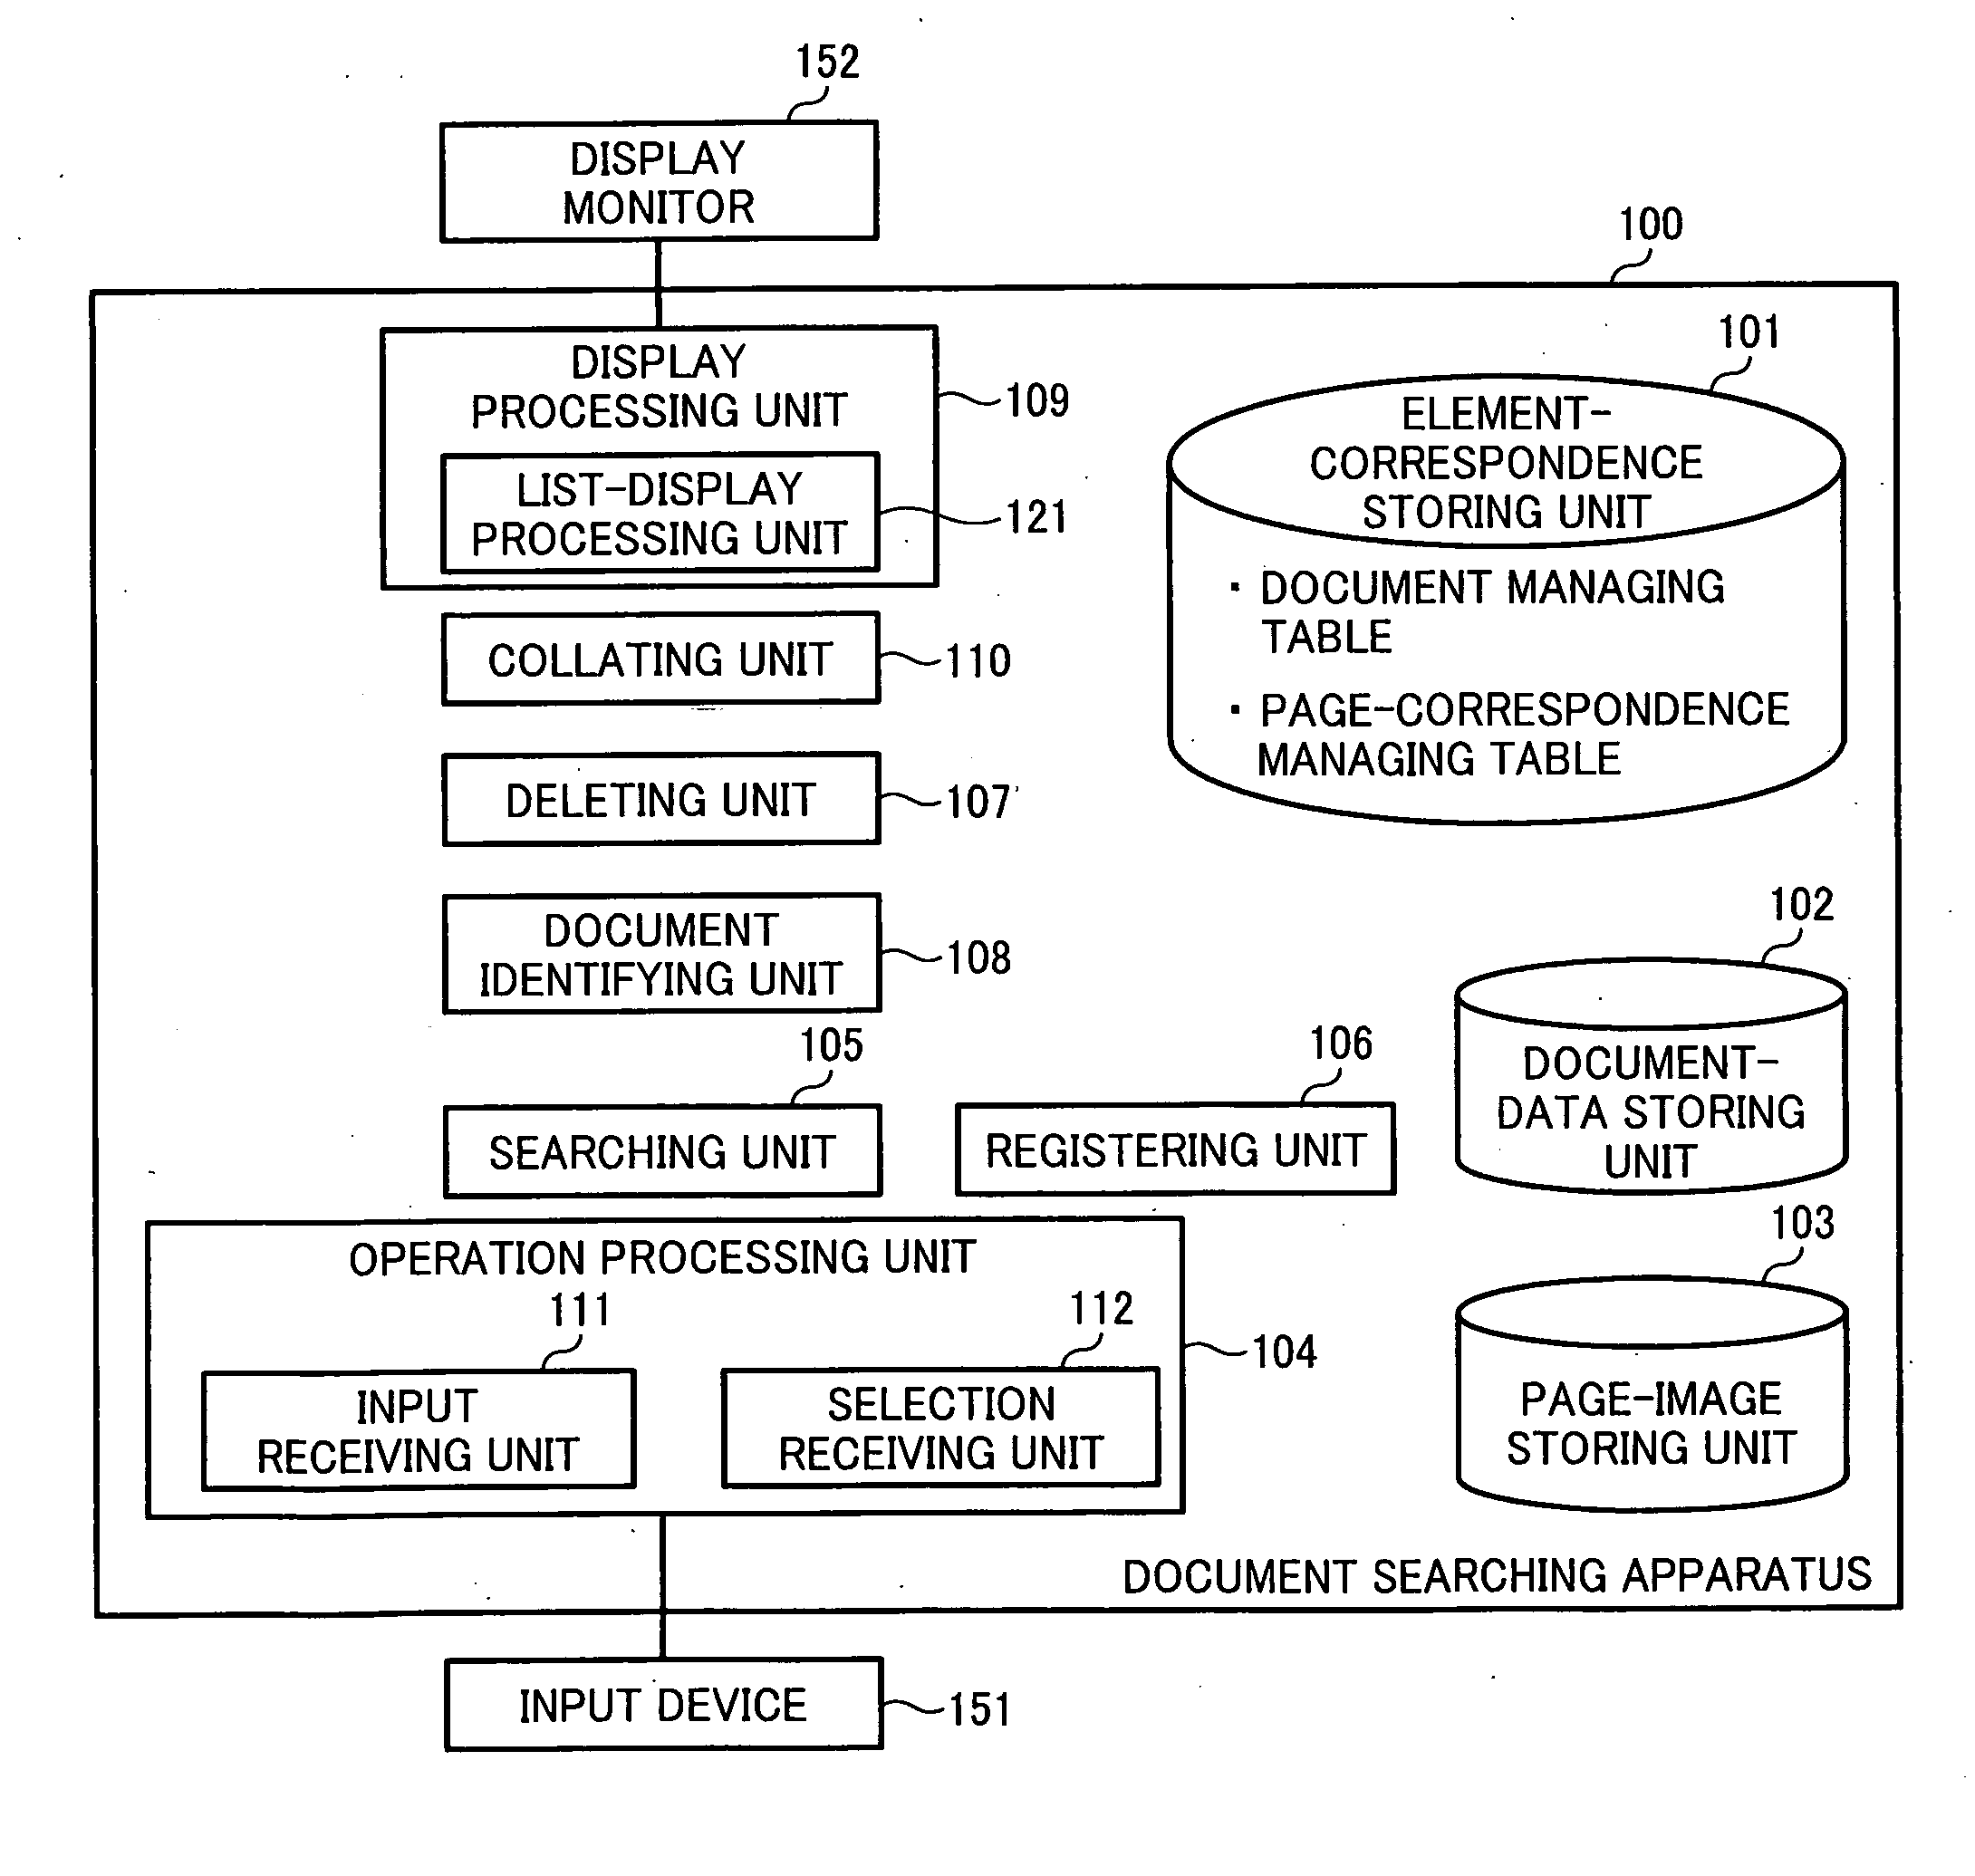 Document searching apparatus, document searching method, and computer-readable recording medium